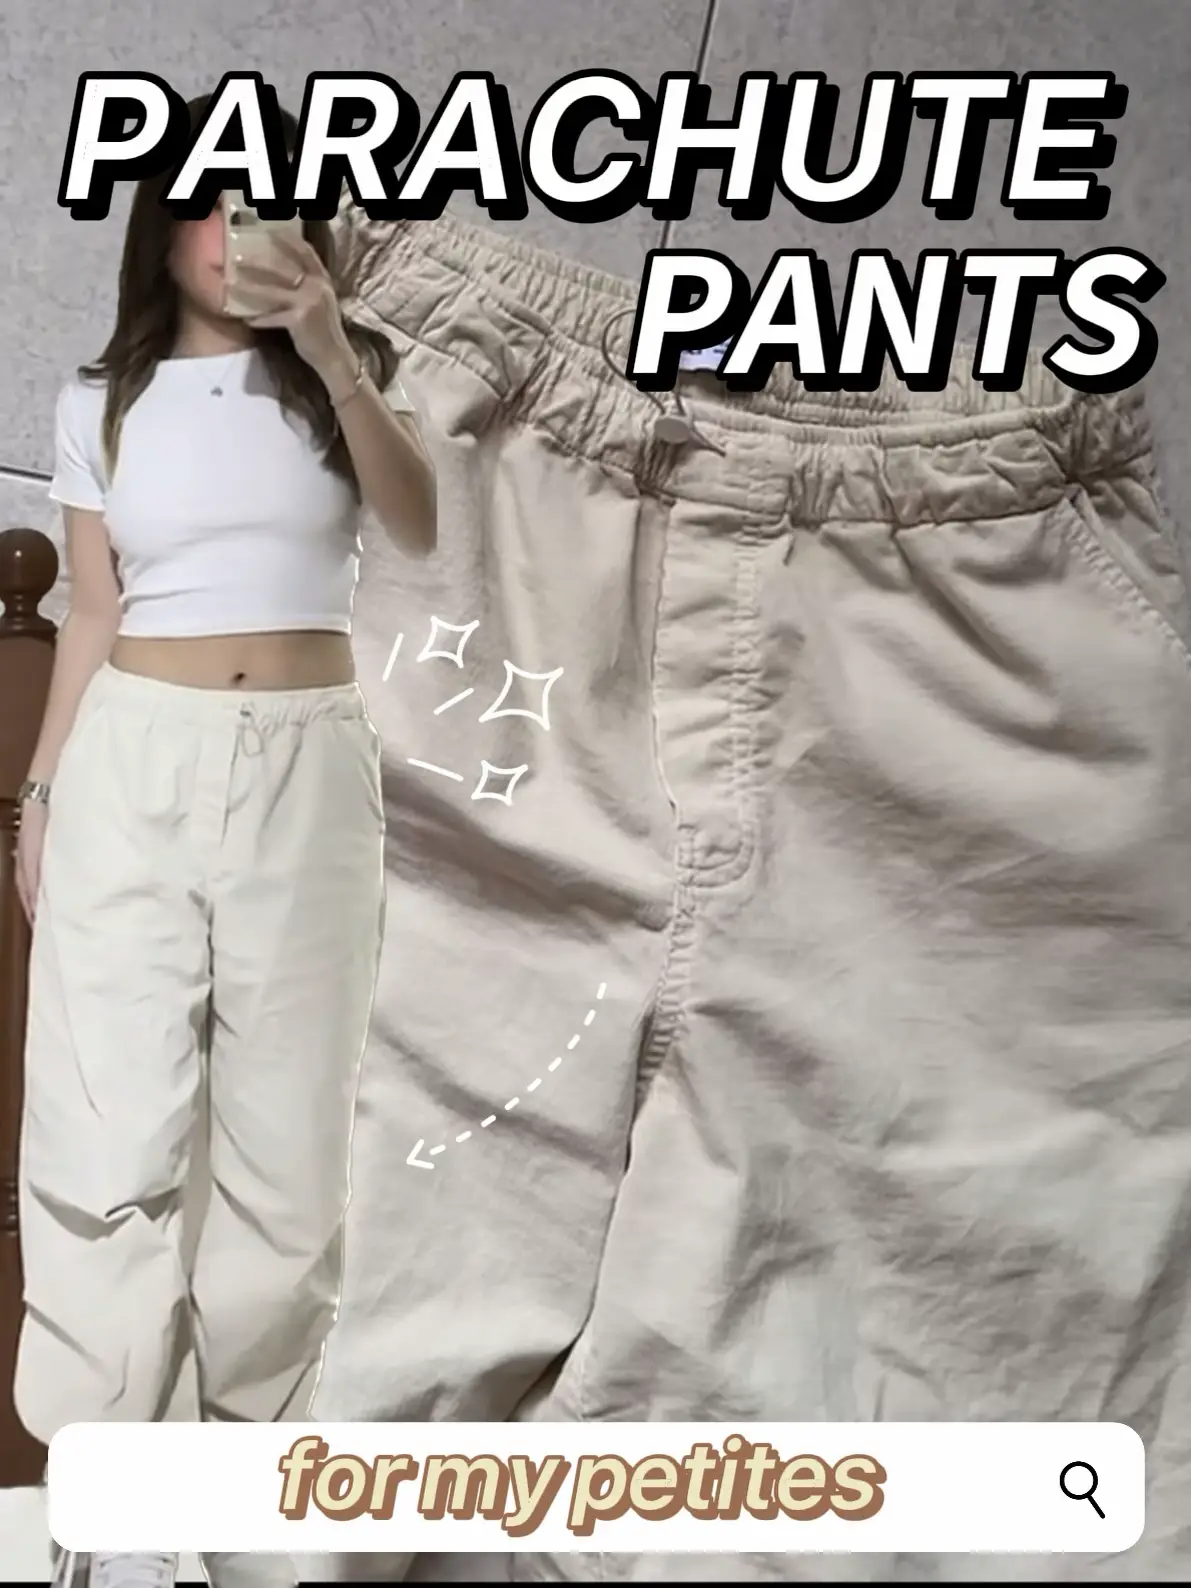 PETITES CAN WEAR THE PARACHUTE PANTS???, Video published by Natasha Lee